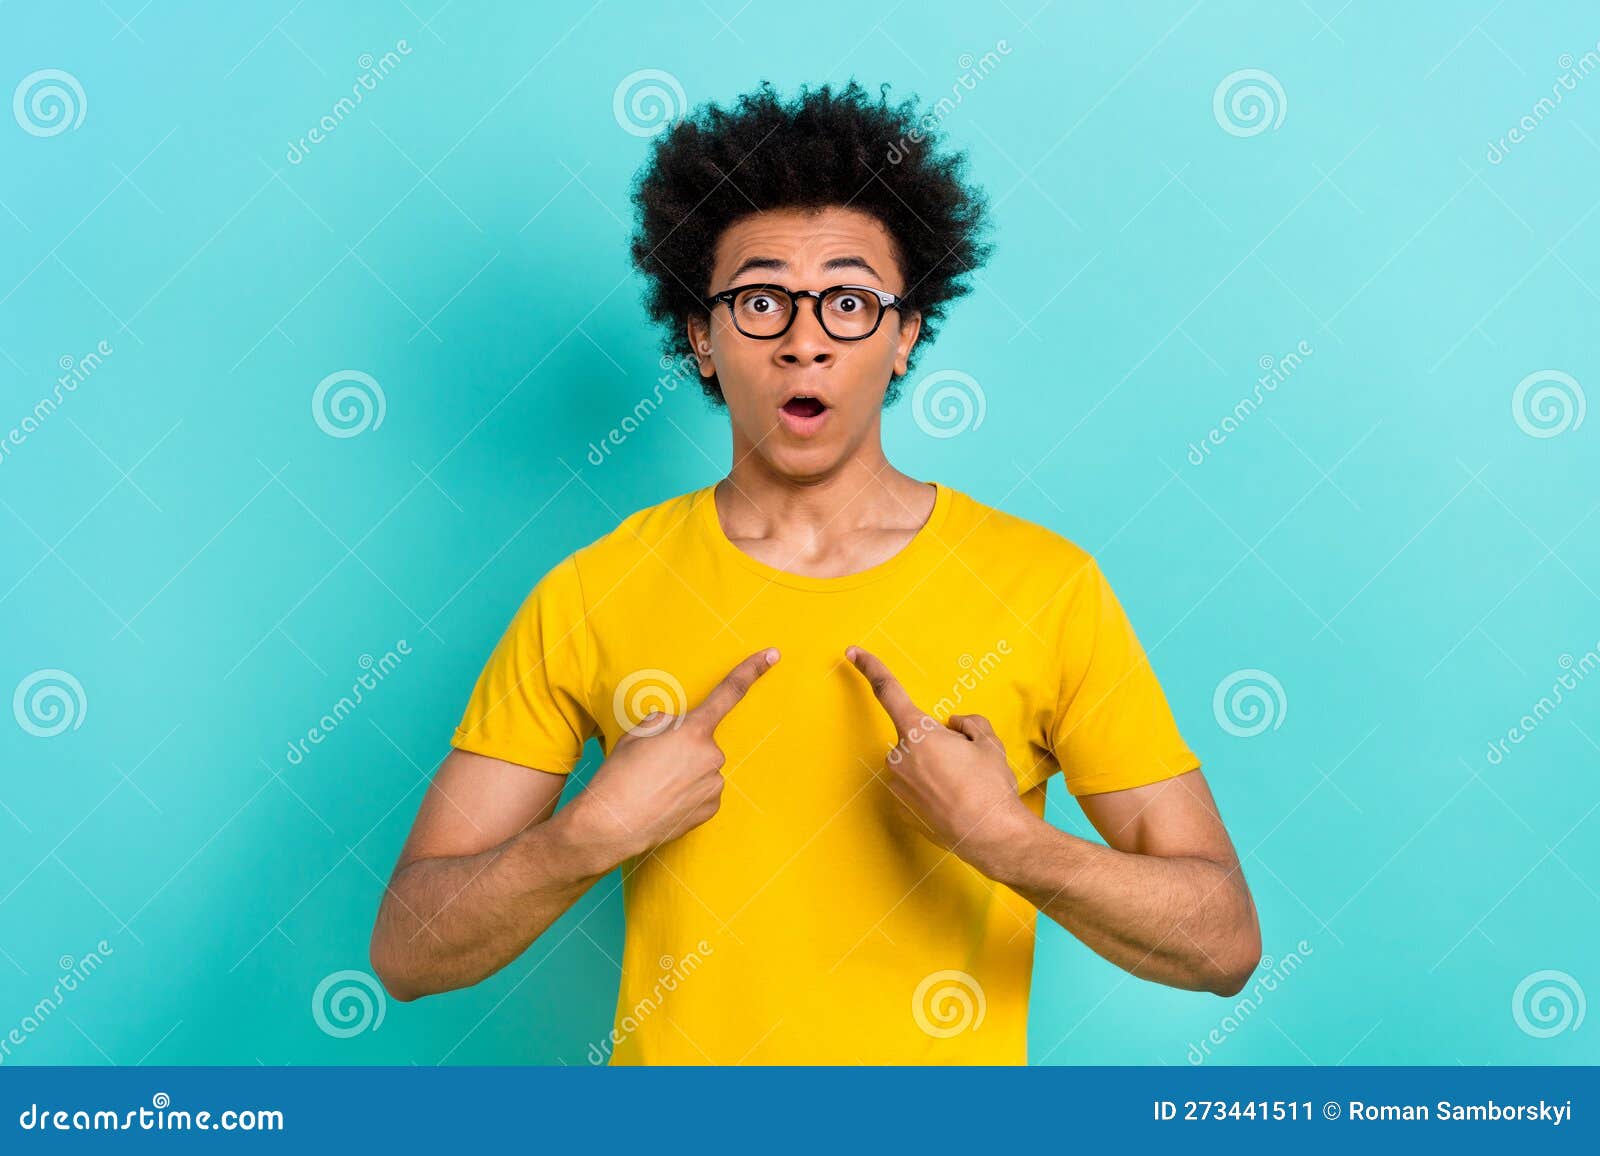 Photo Of Astonished Speechless Guy Afro Hairstyle Wear Yellow T Shirt Directing At Himself